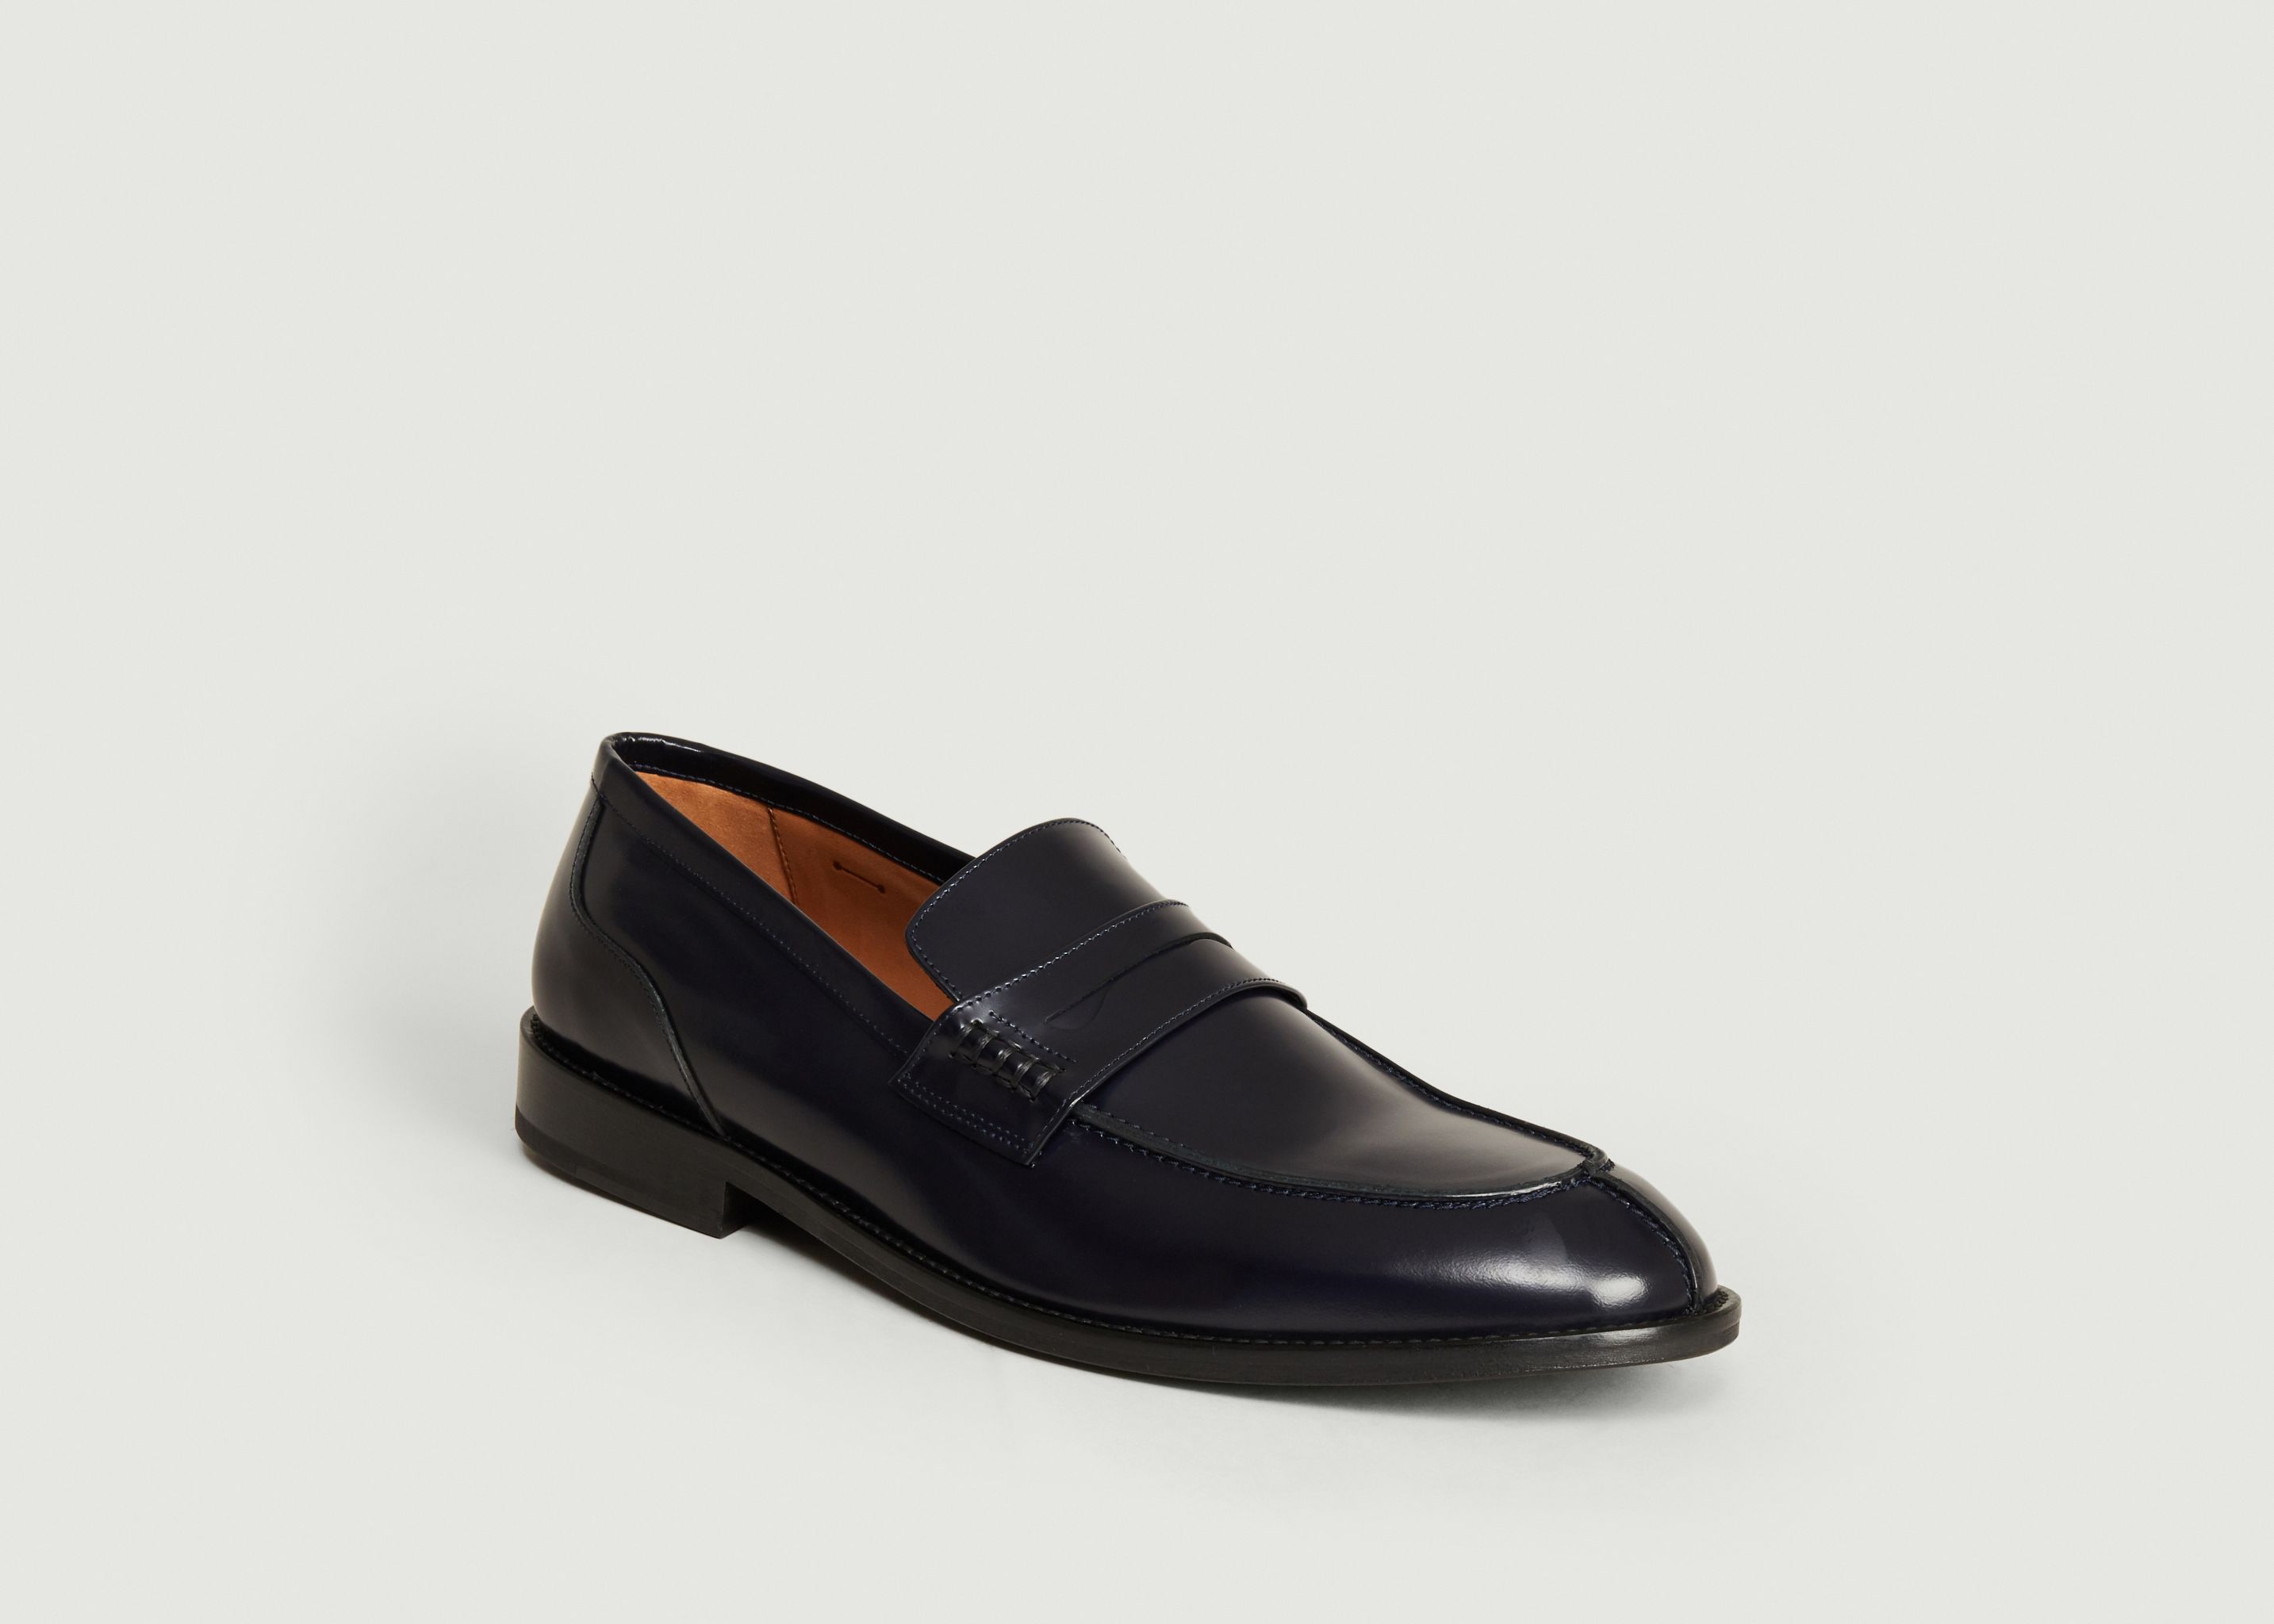 Polido leather loafers - Anthology Paris